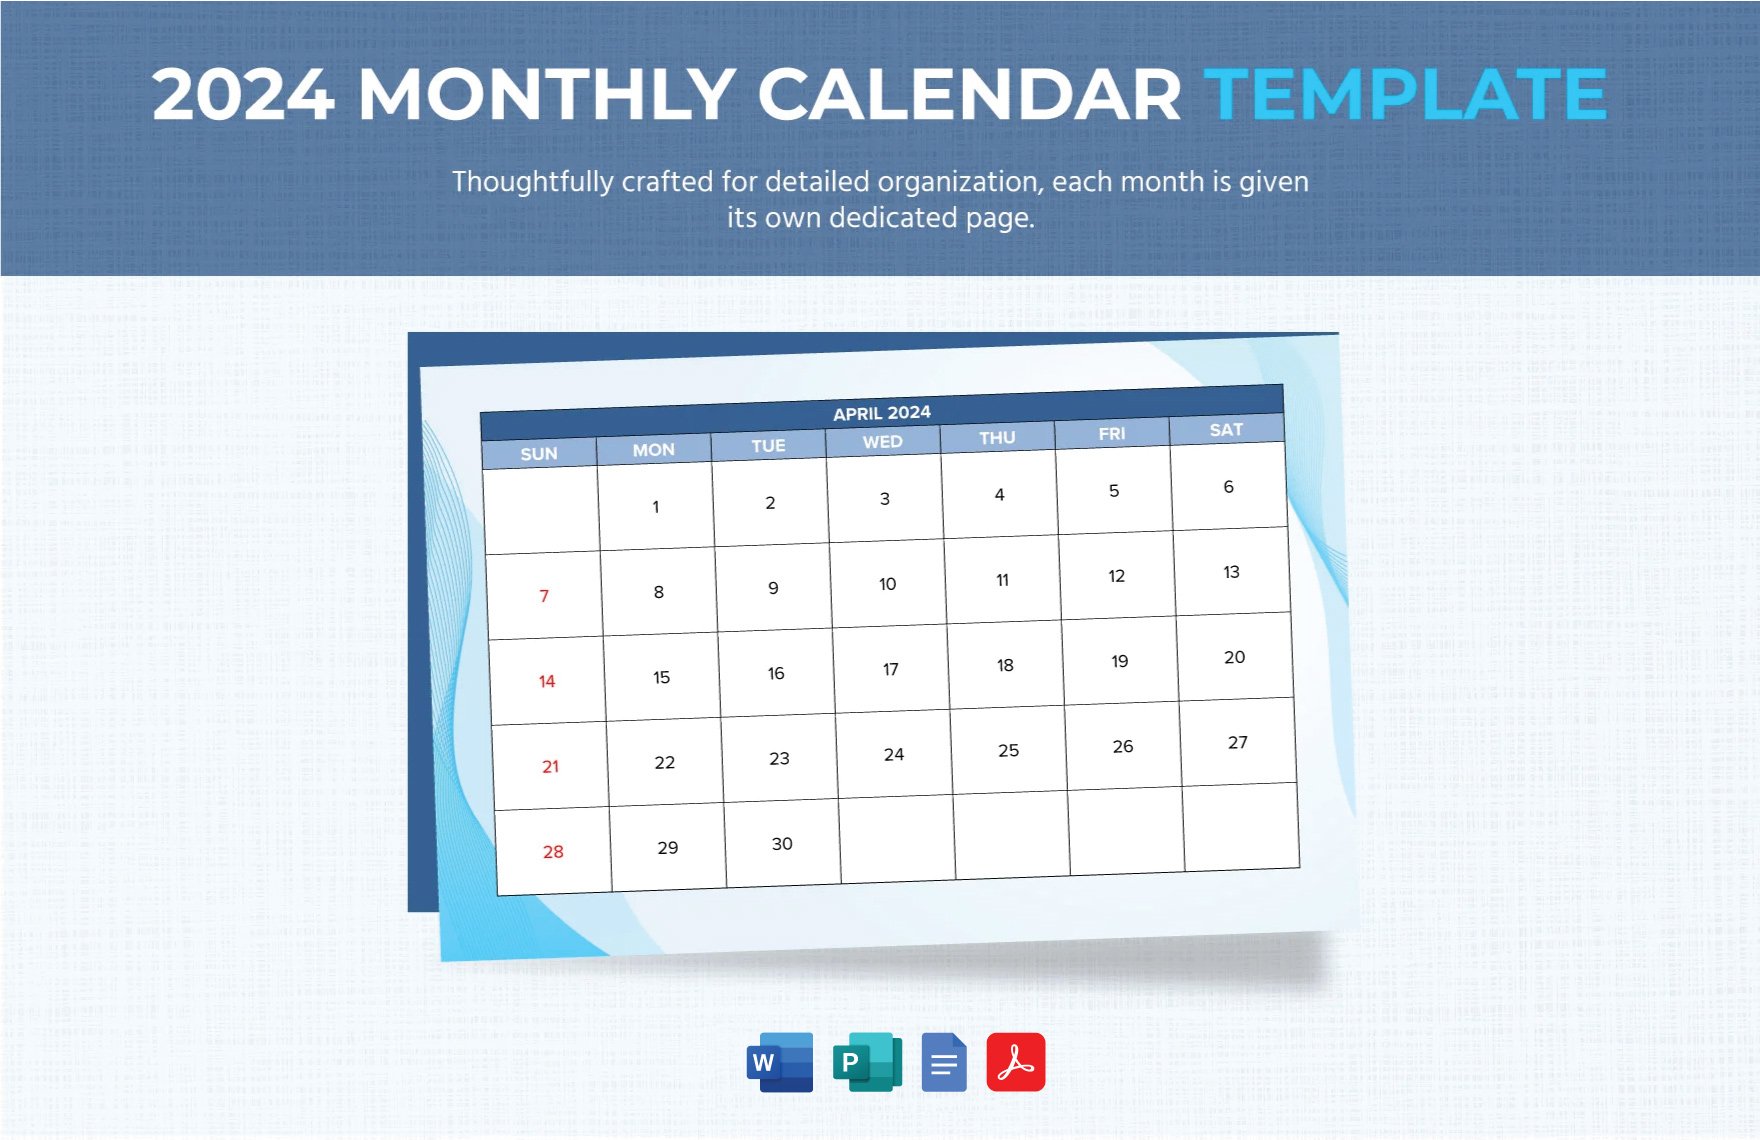 2024 Monthly Calendar Template in Word, Google Docs, PDF, Publisher